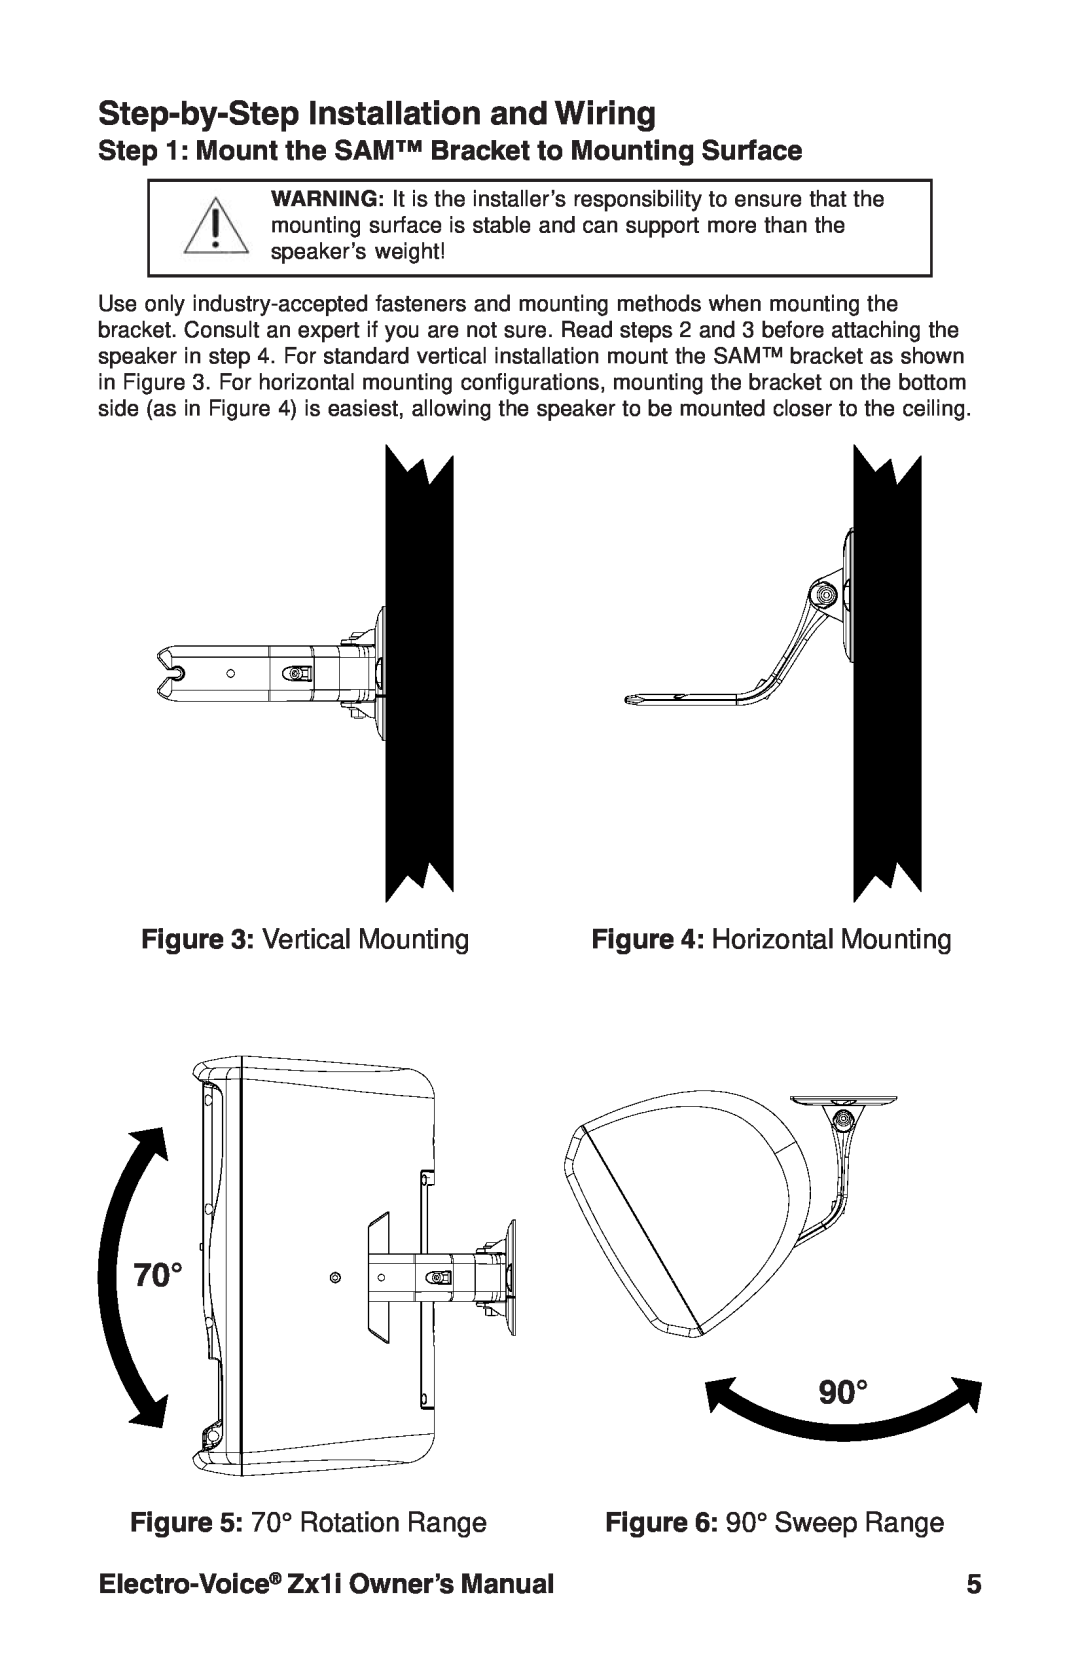 Electro-Voice Zx1i-90 Step-by-Step Installation and Wiring, Mount the SAM Bracket to Mounting Surface, Vertical Mounting 